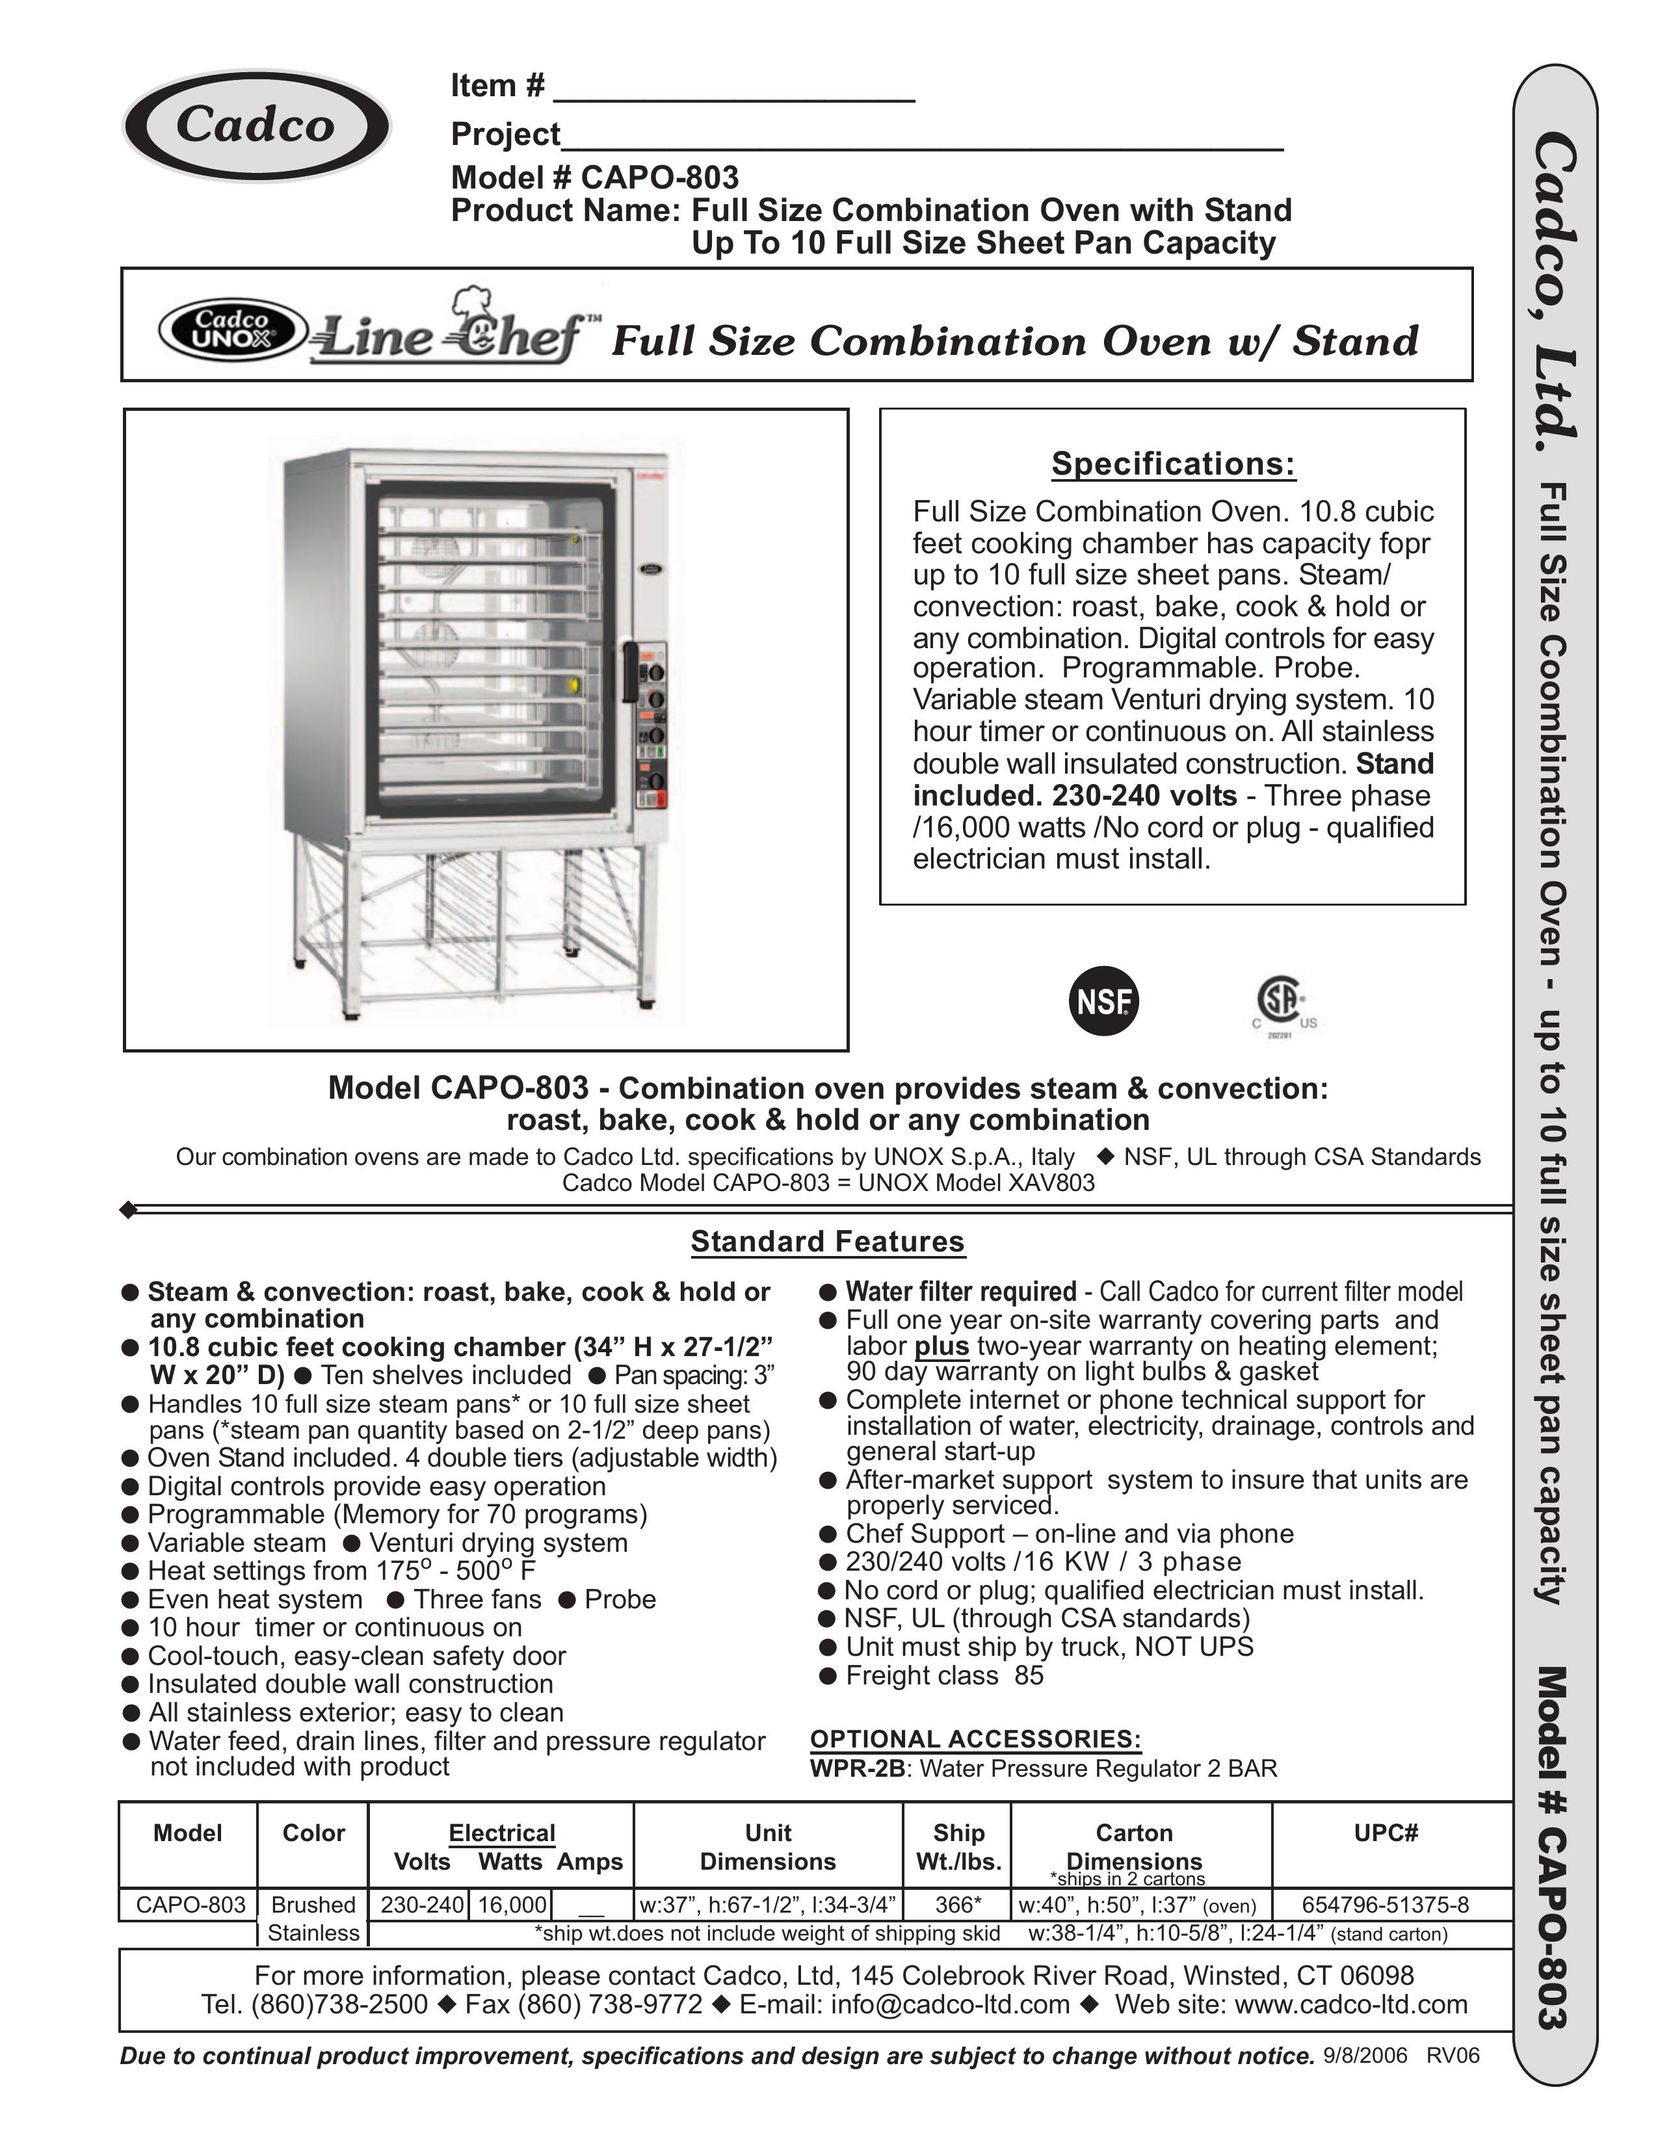 Cadco CAPO-803 Microwave Oven User Manual